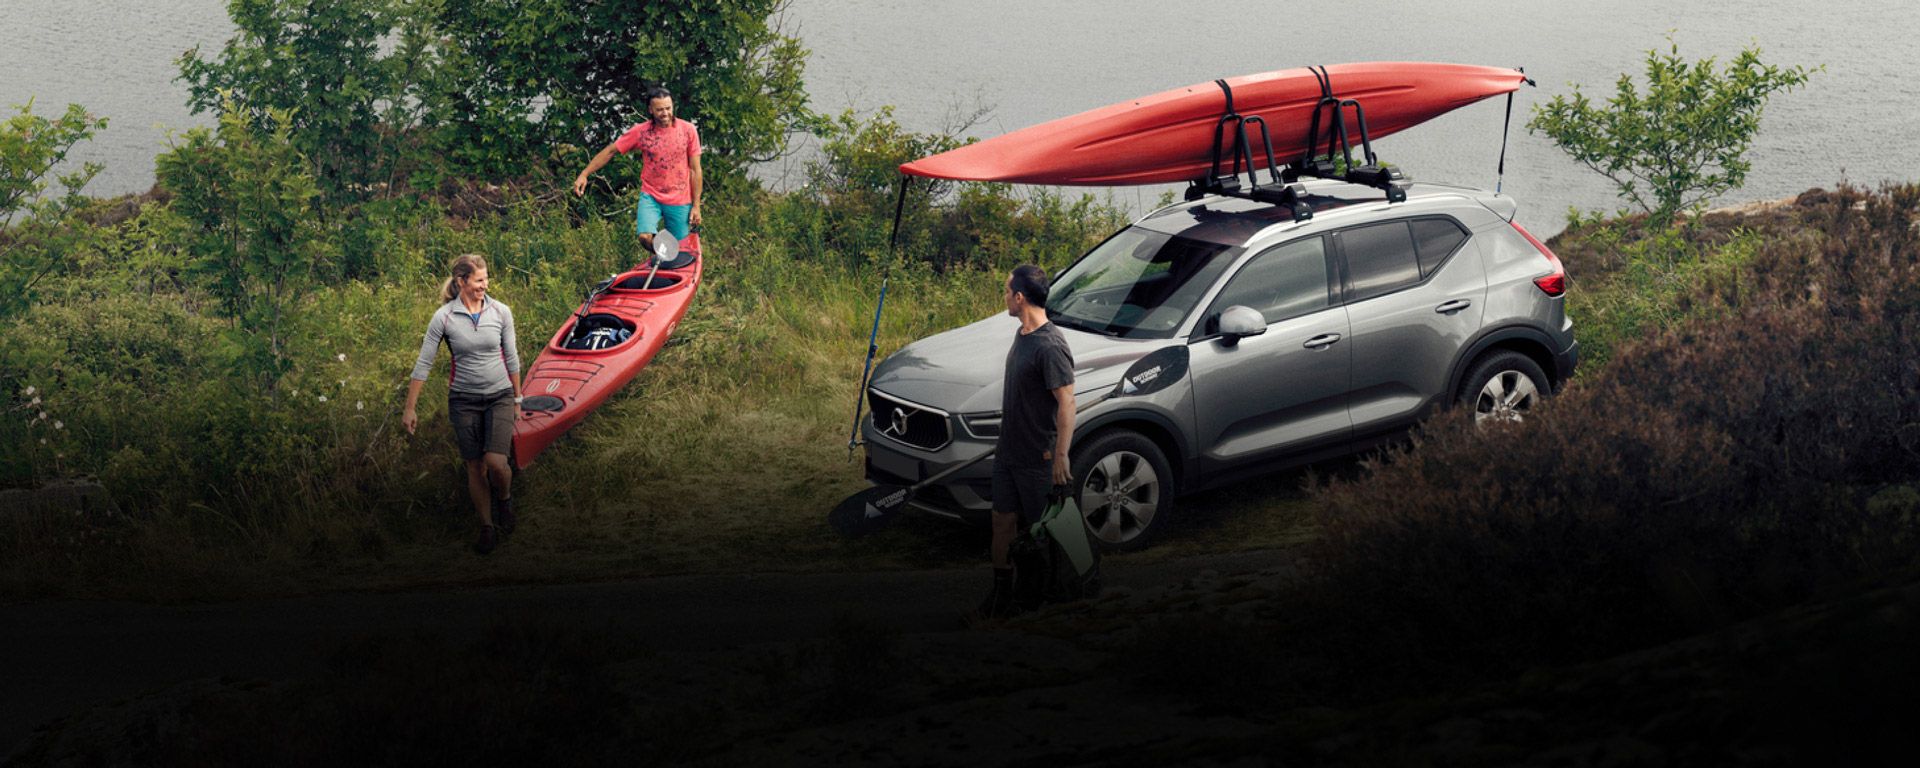 Two people carry their kayak ashore while a man stands beside his car with a kayak on the Thule kayak rack.